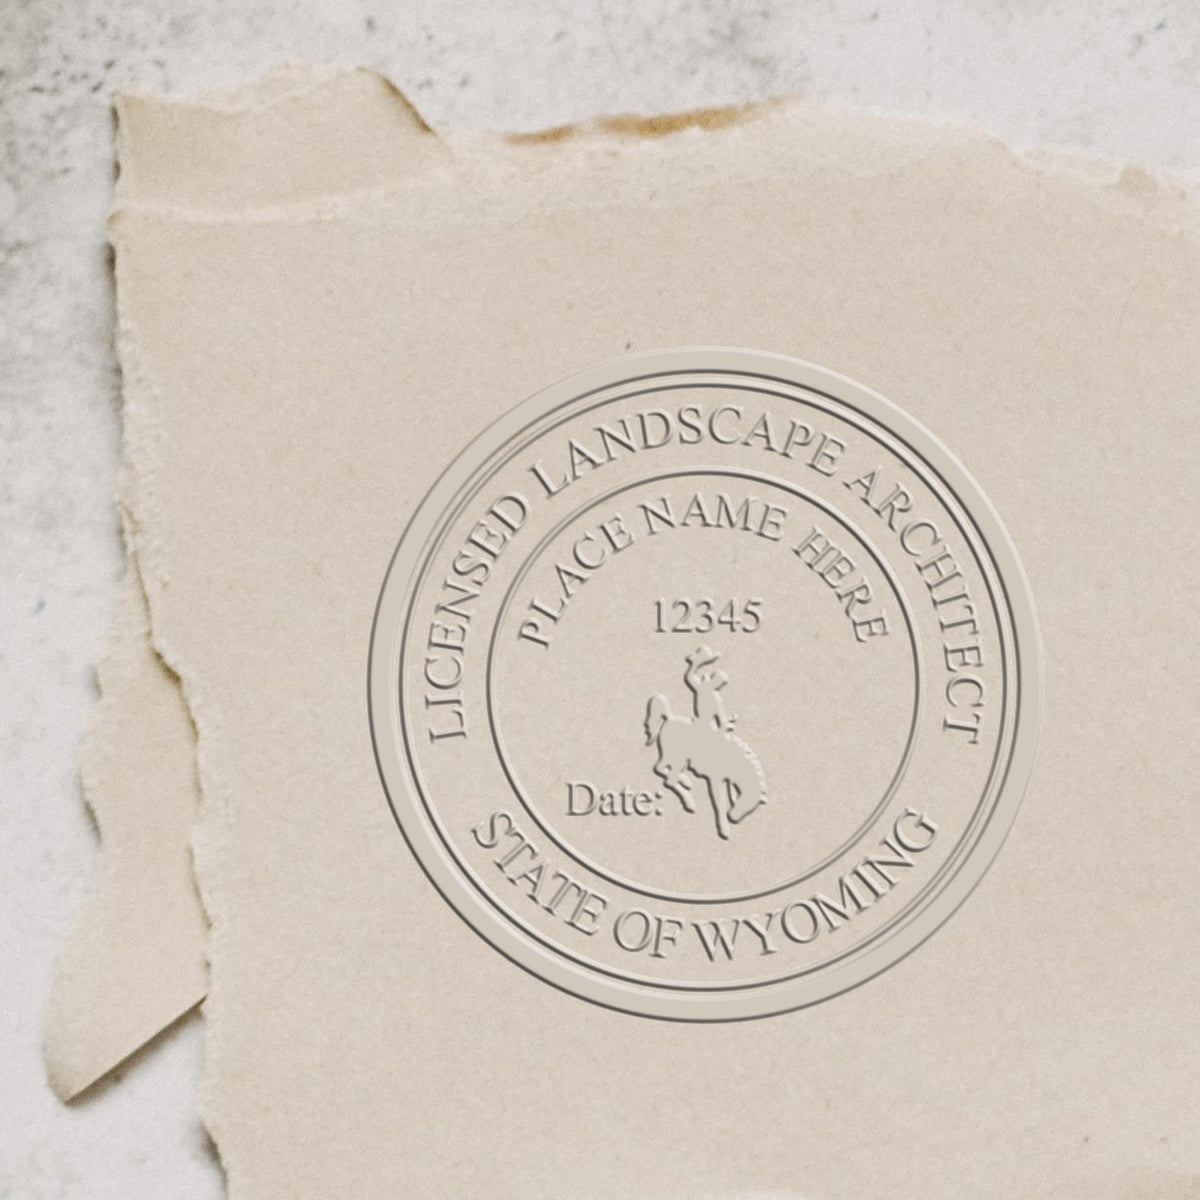 An in use photo of the Hybrid Wyoming Landscape Architect Seal showing a sample imprint on a cardstock